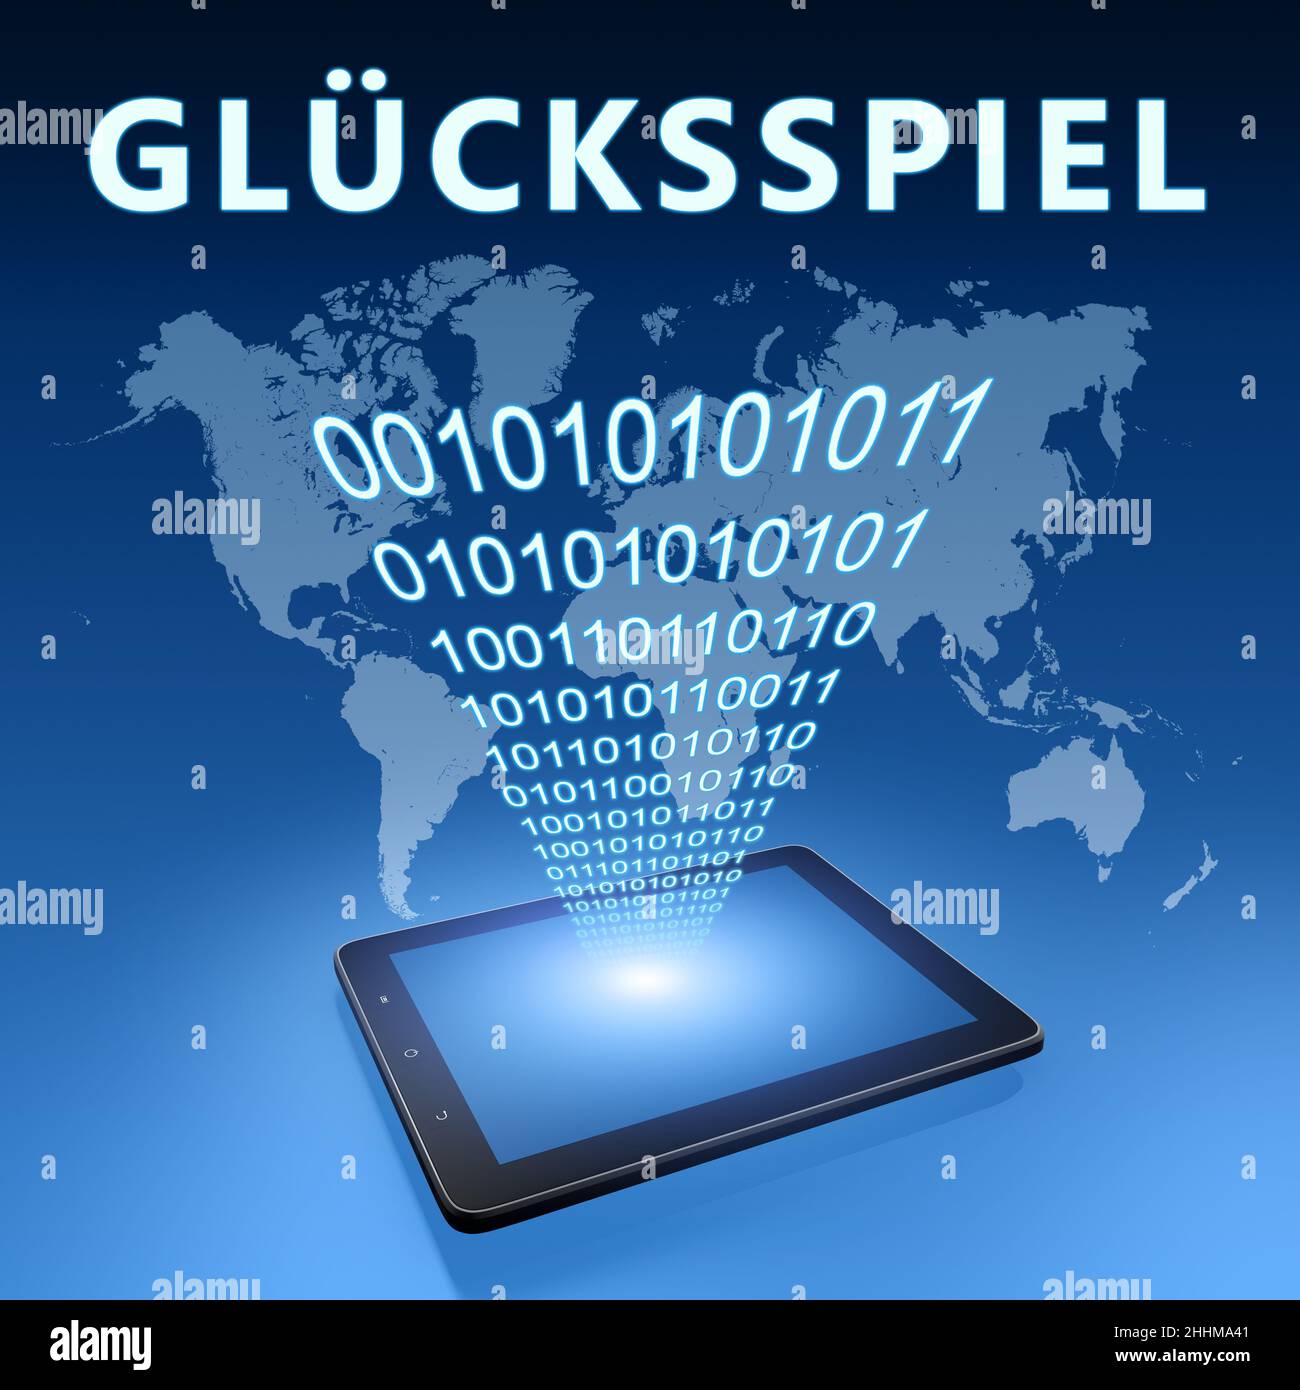 Gluecksspiel - german word for gambling or game of chance - text concept with tablet computer on blue wolrd map background - 3d render illustration. Stock Photo